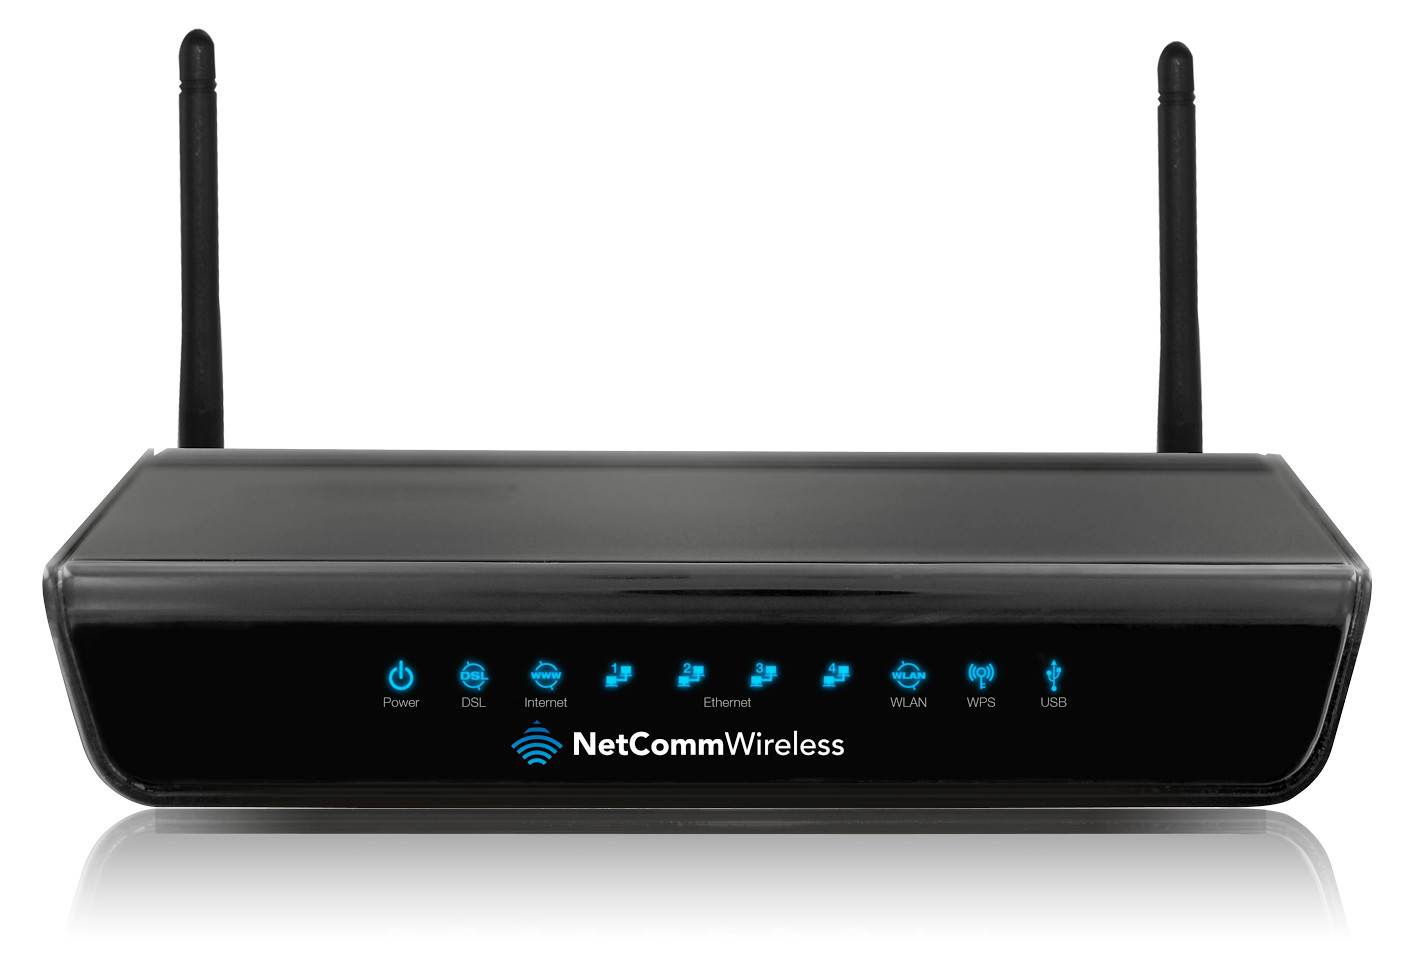 Netcomm Wireless N300 NB604n Modem Router Setup Guide (ADSL) | Blogpipe